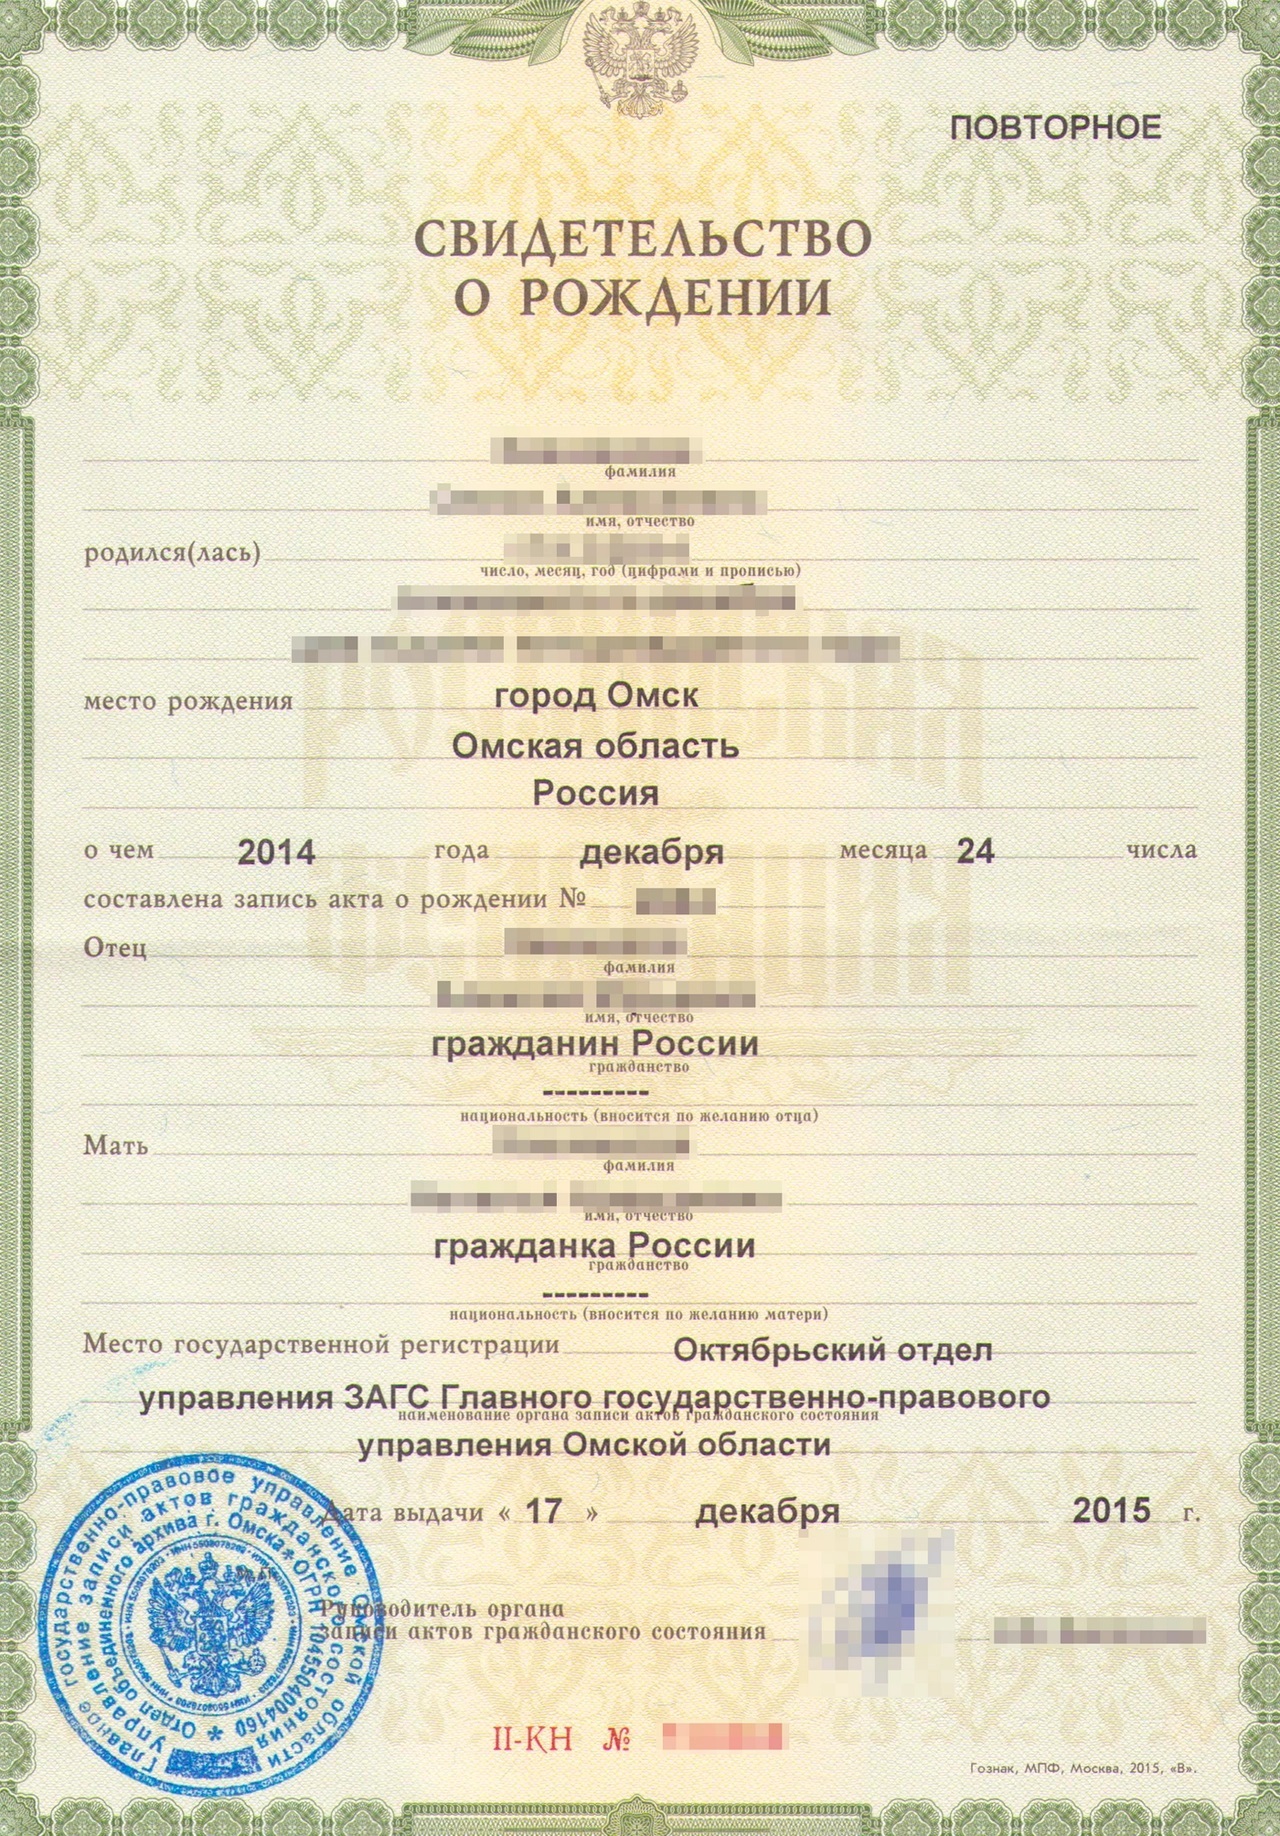 Russian to English translation of birth certificate in the UK